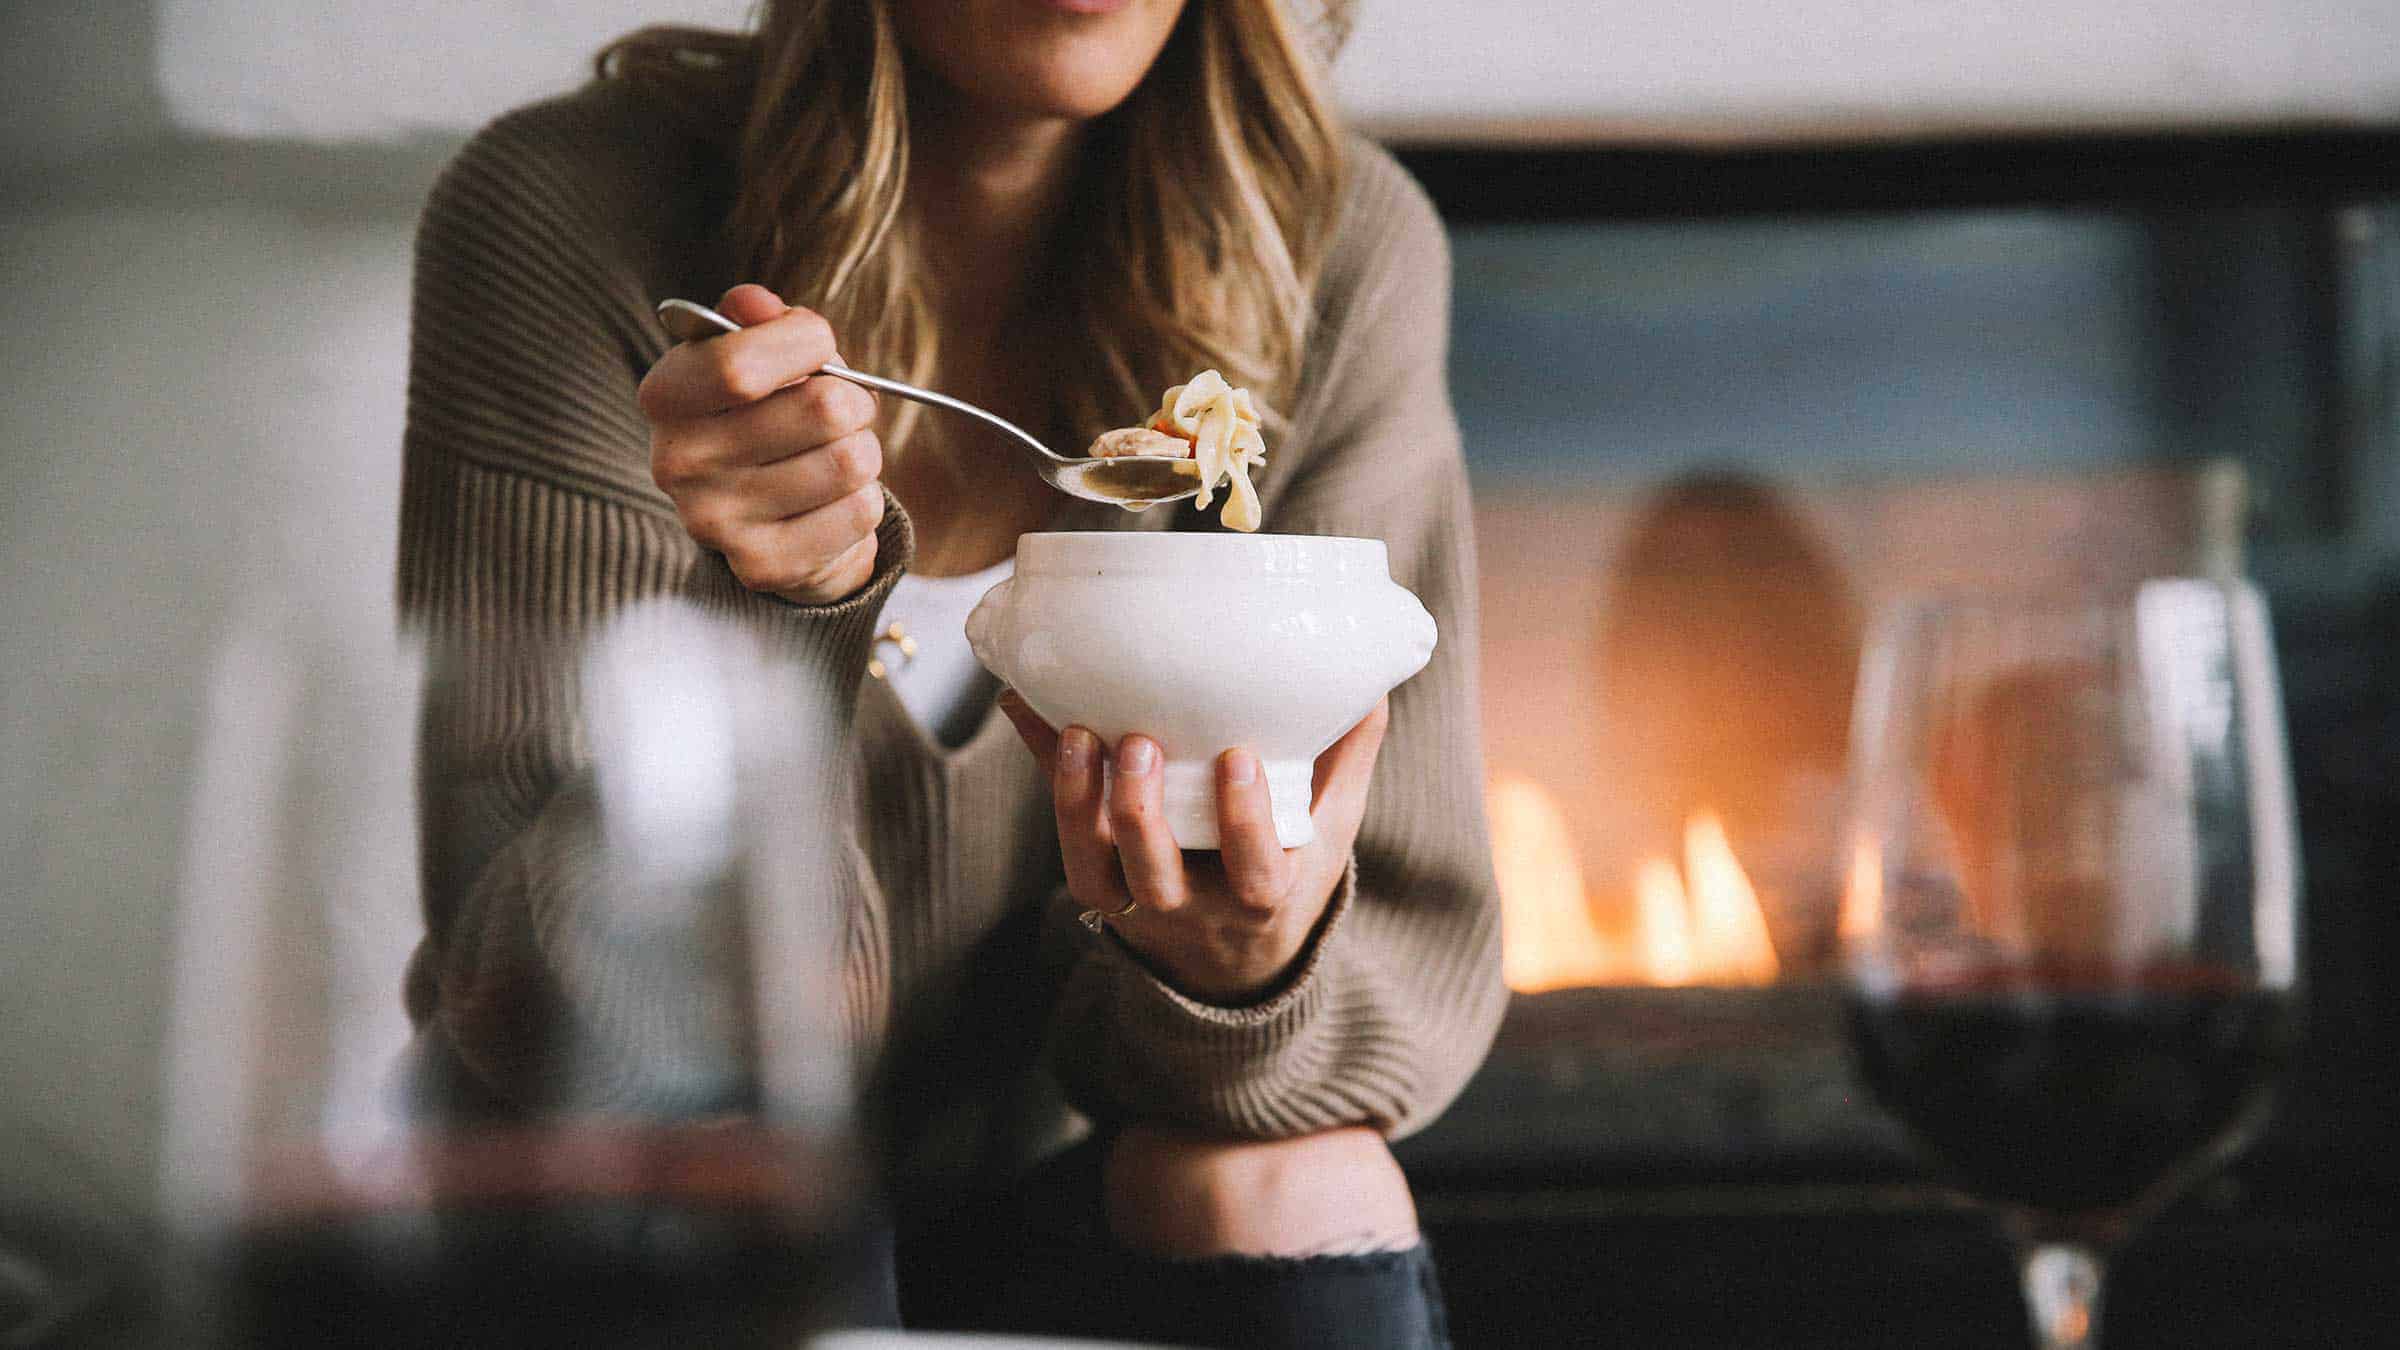 Woman eating noodle soup from a bowl, fireplace in the background